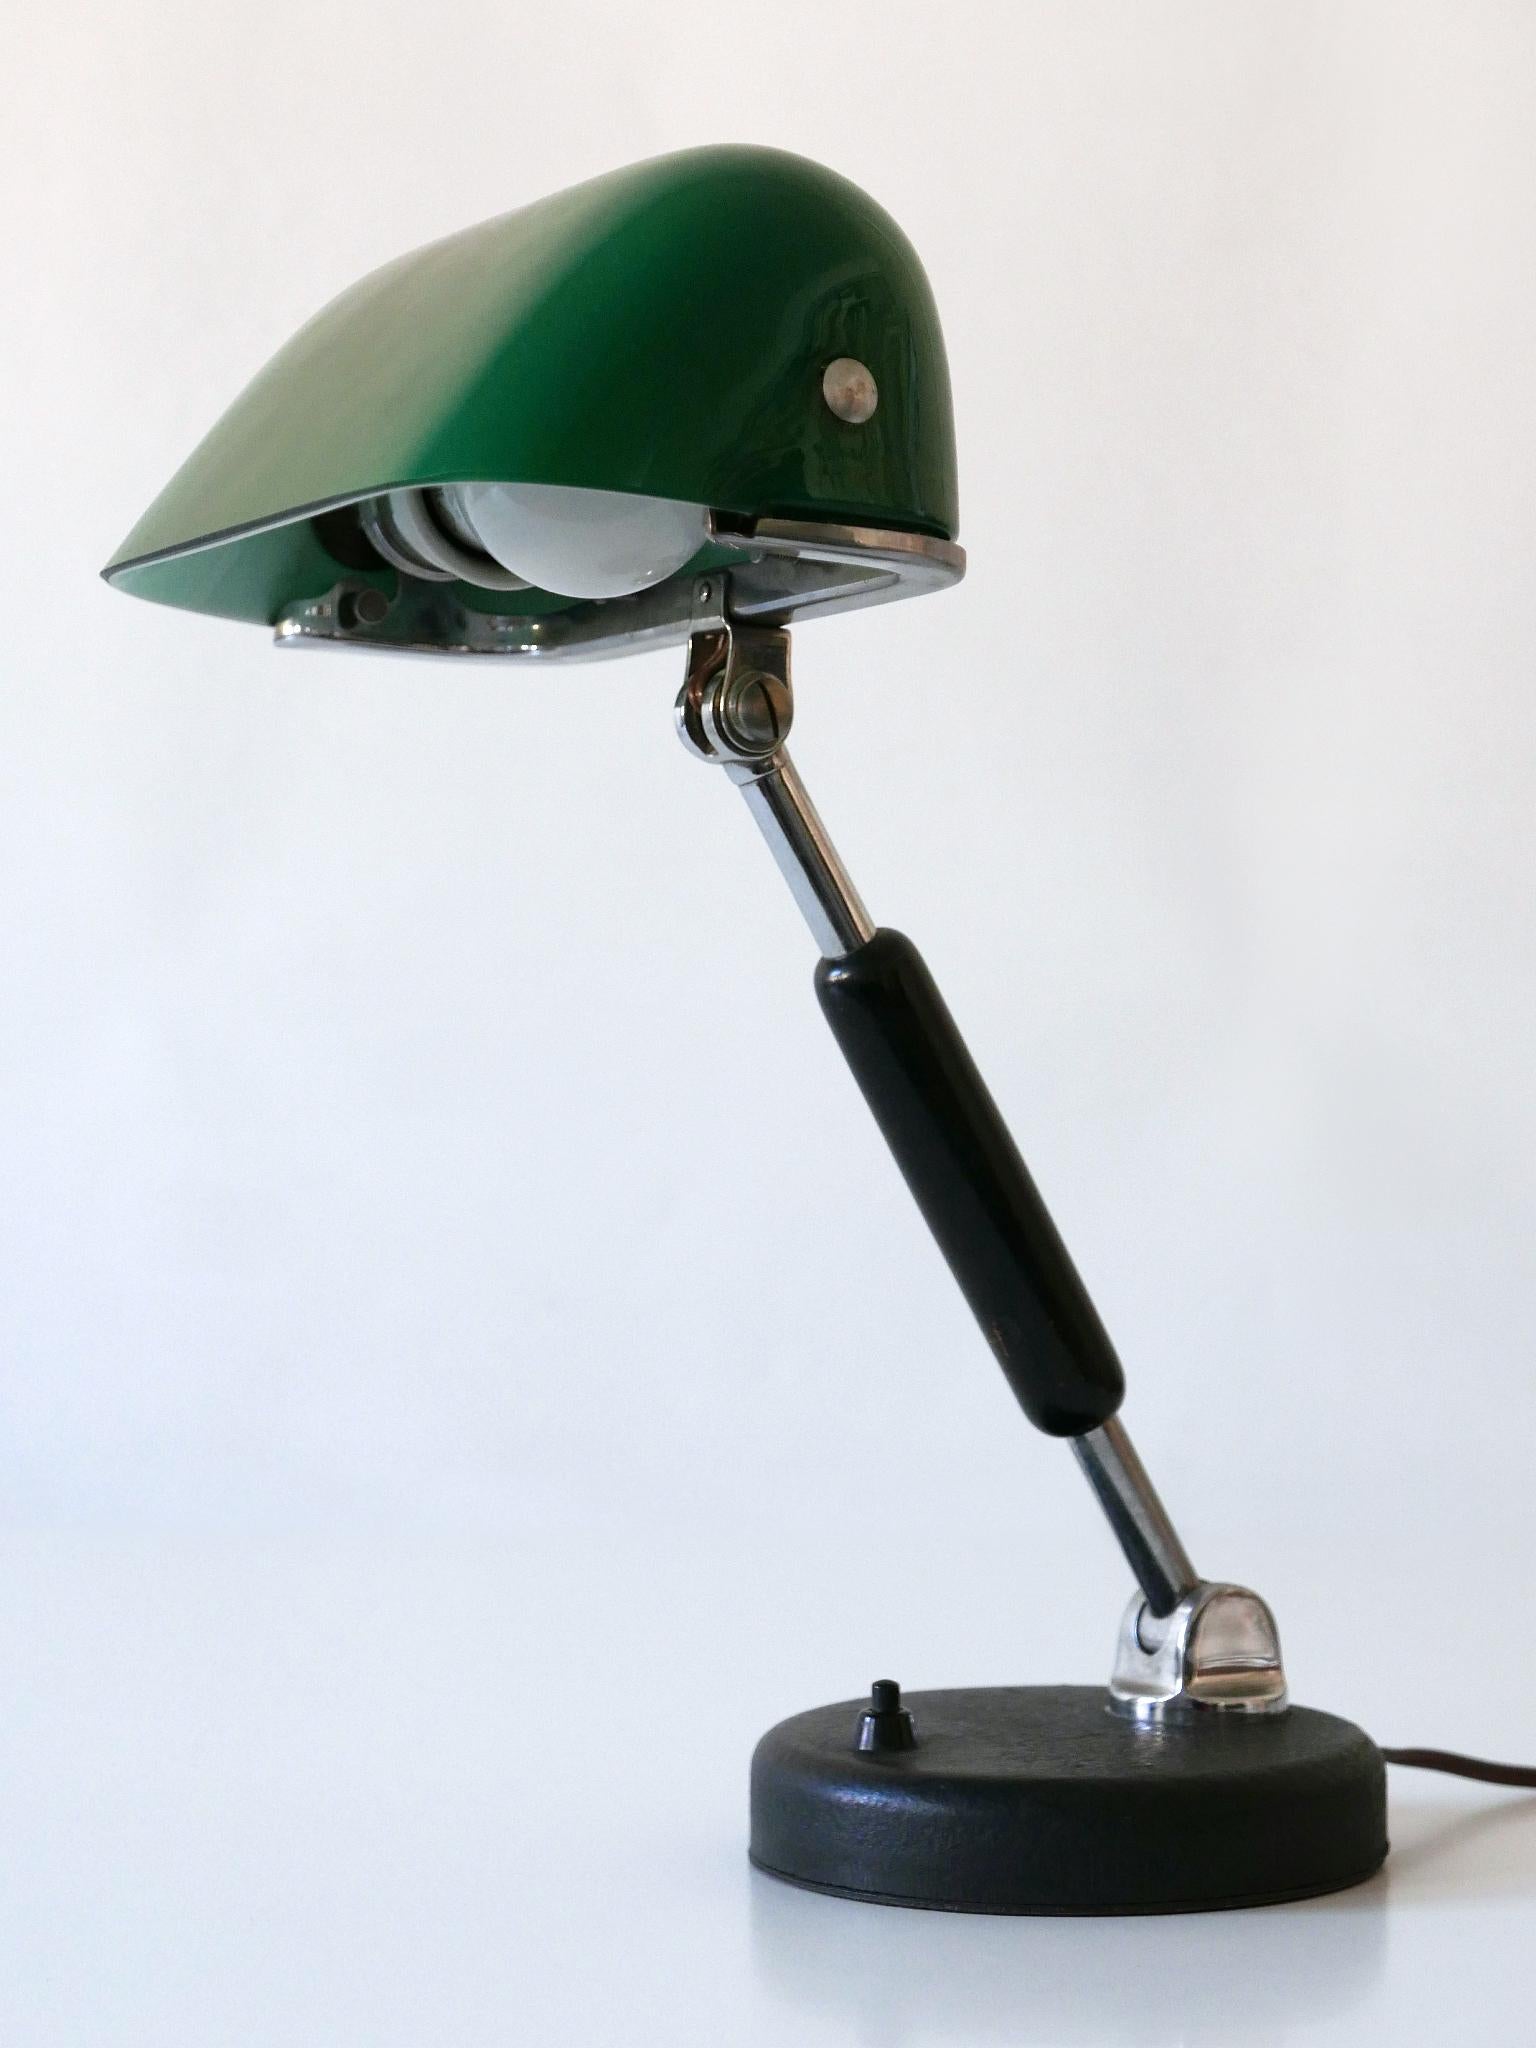 Exceptional Bauhaus Bankers Table Lamp with Original Green Glass, 1930s, Germany 4